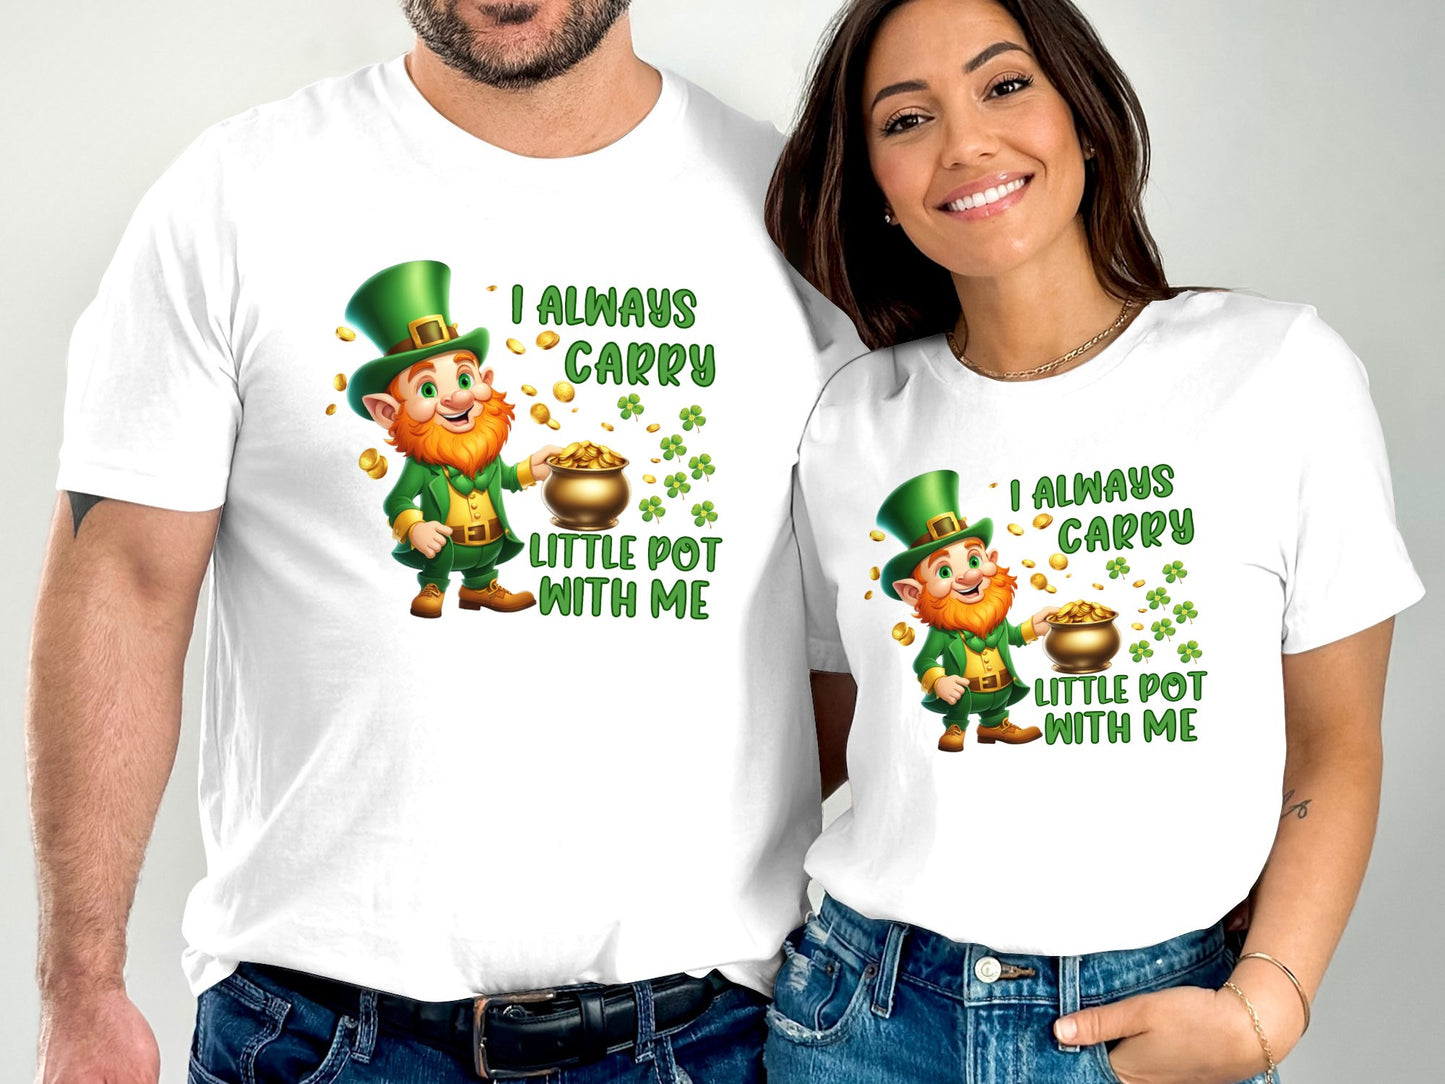 I always carry a little pot with me (St. Patrick's Day T-shirt)